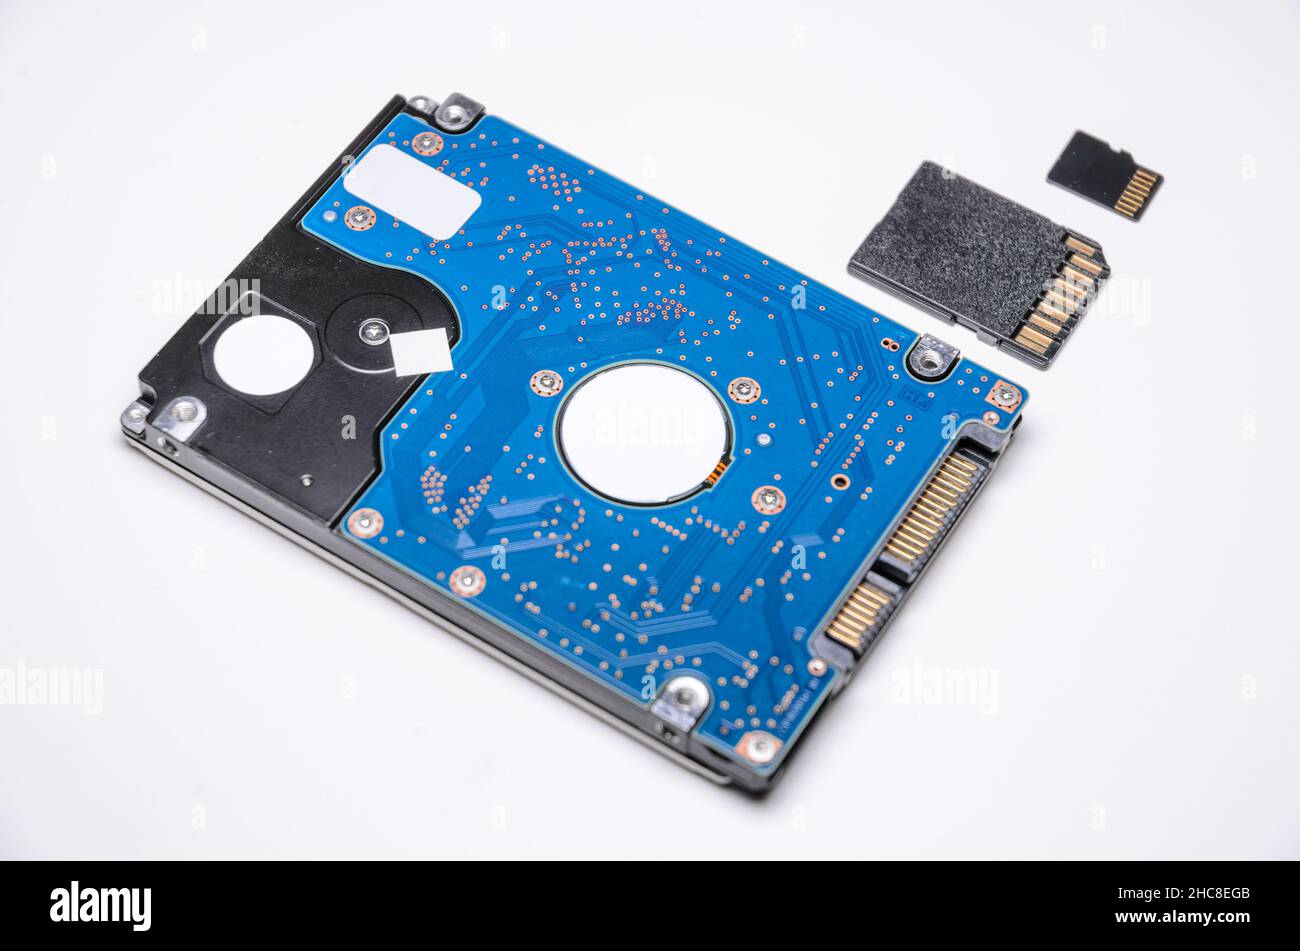 Internal 2.5 inch HDD Hard Disc Drive with SD Memory Card and micro SD card  on white background, size comparison and differences of modern technology  Stock Photo - Alamy